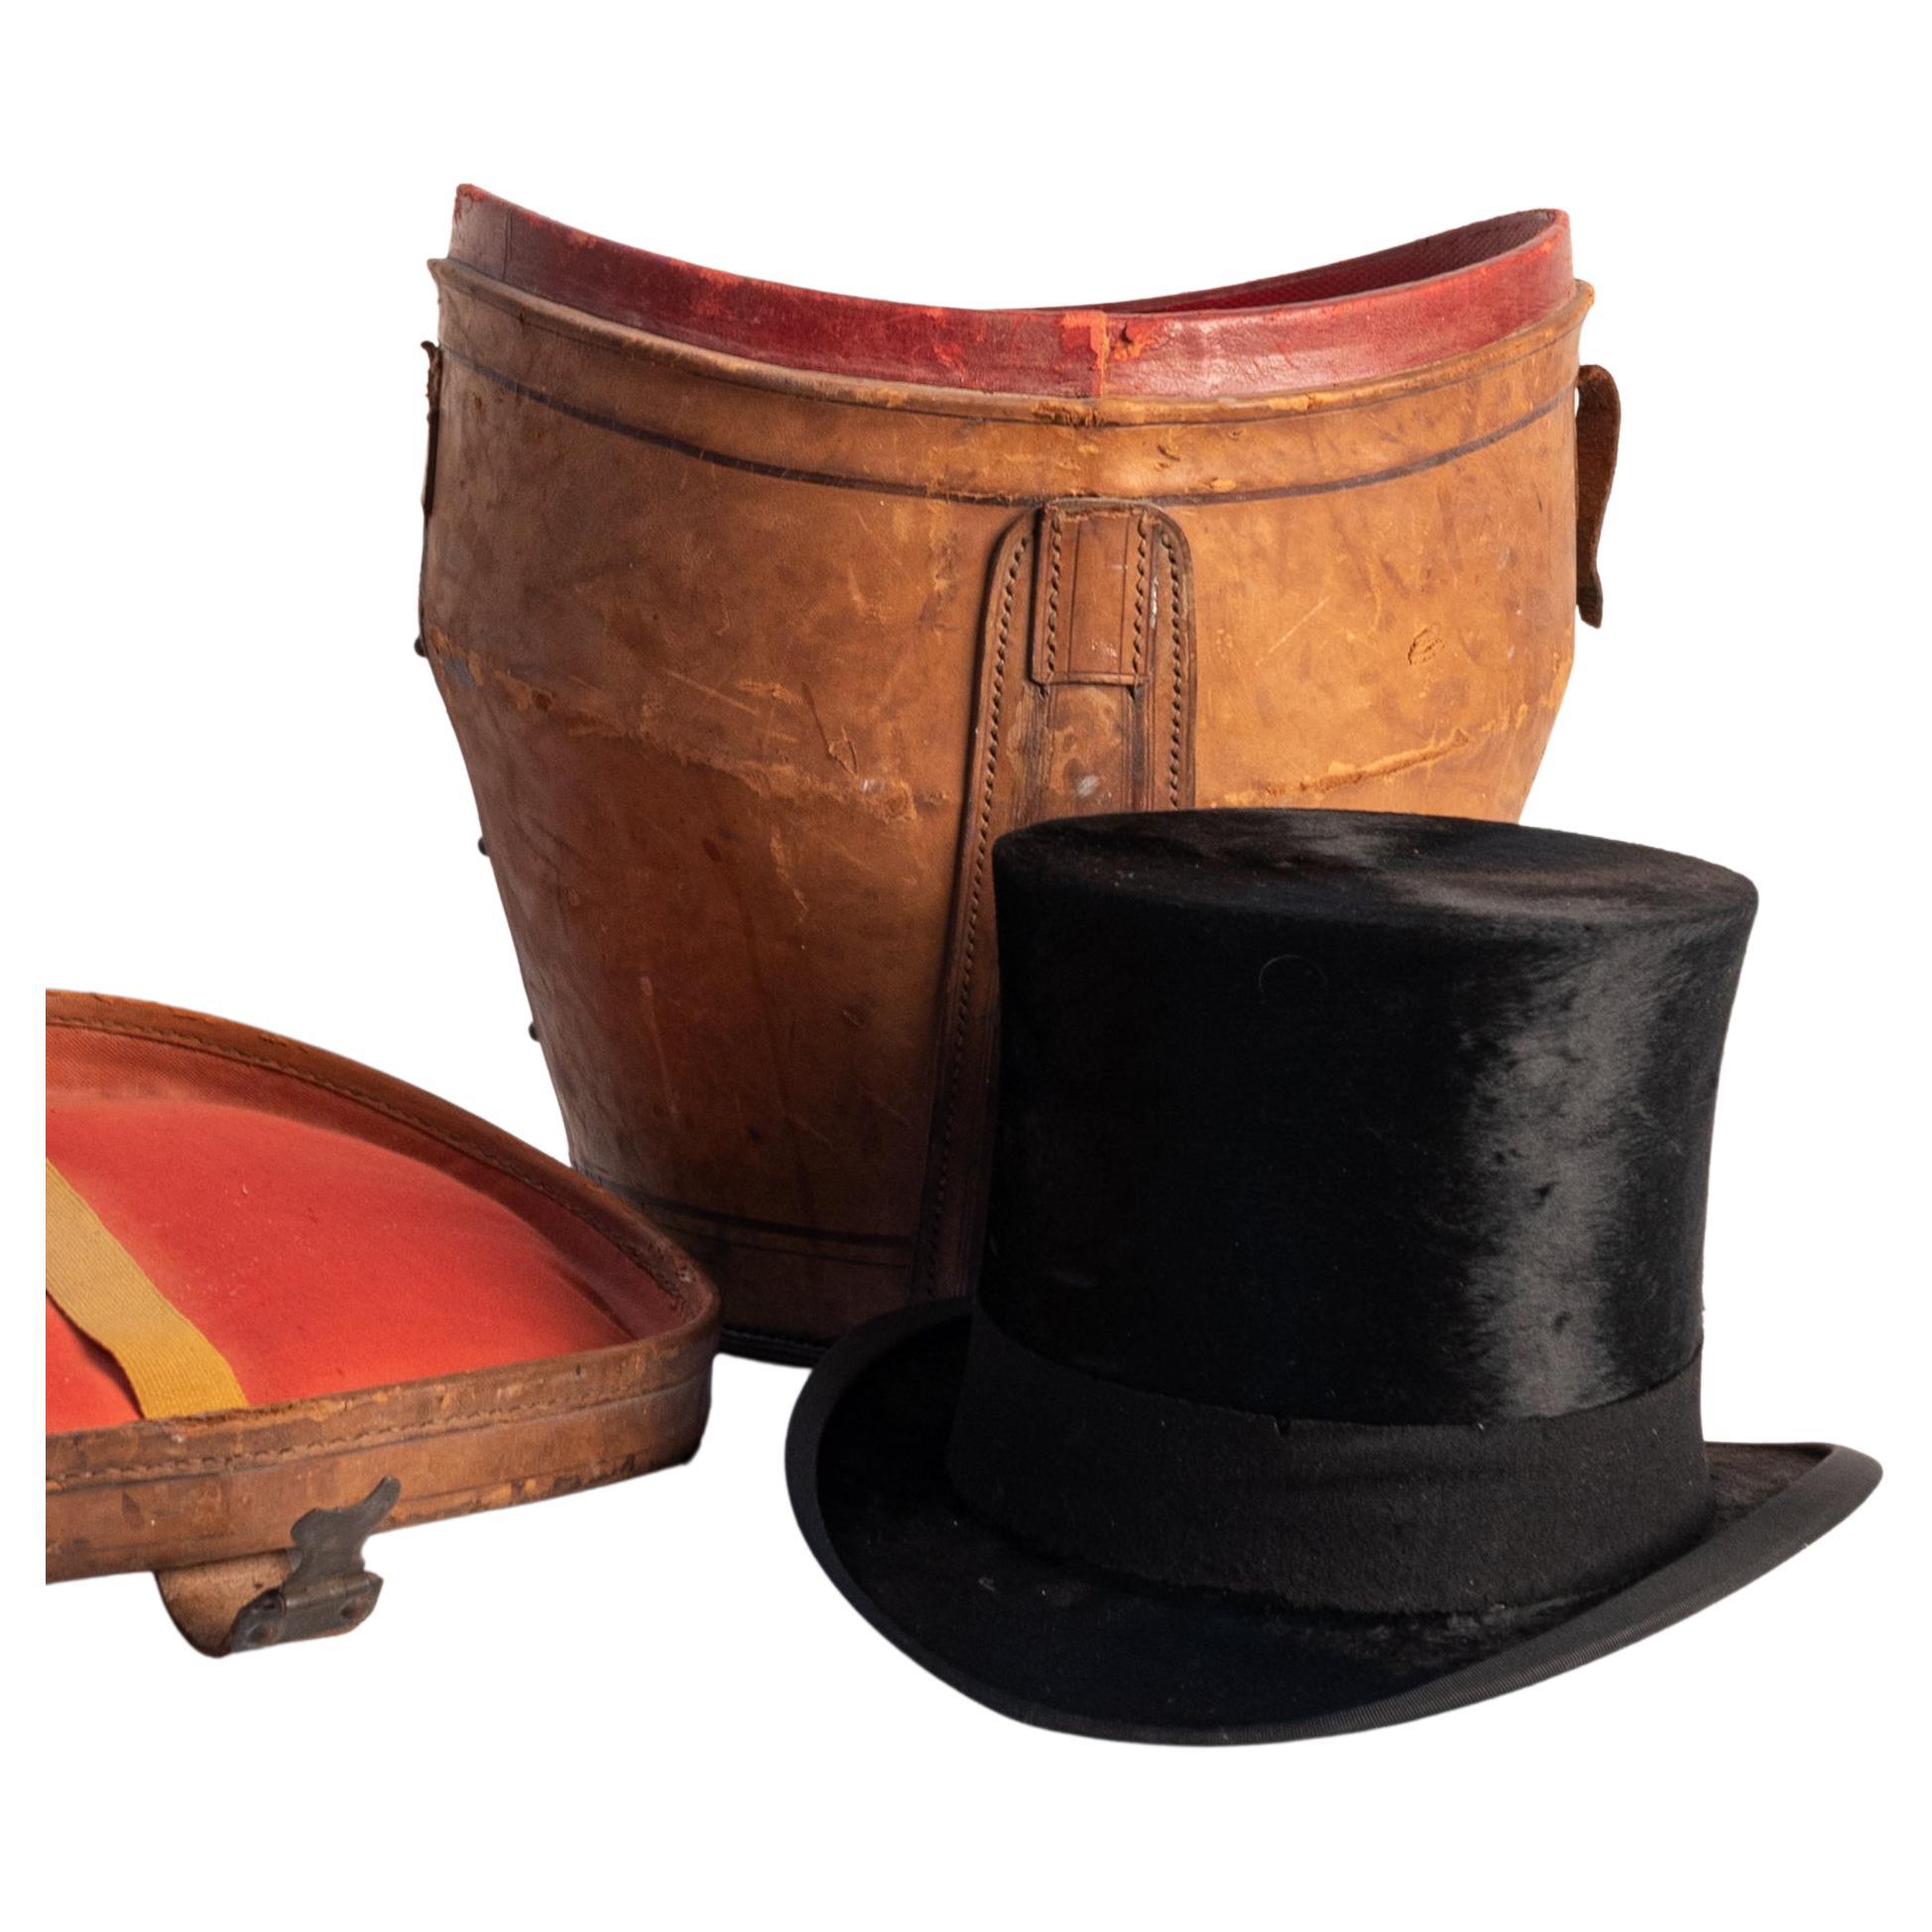 Moleskin top hat, with leather hatbox (late 19th - early 20th century) For Sale